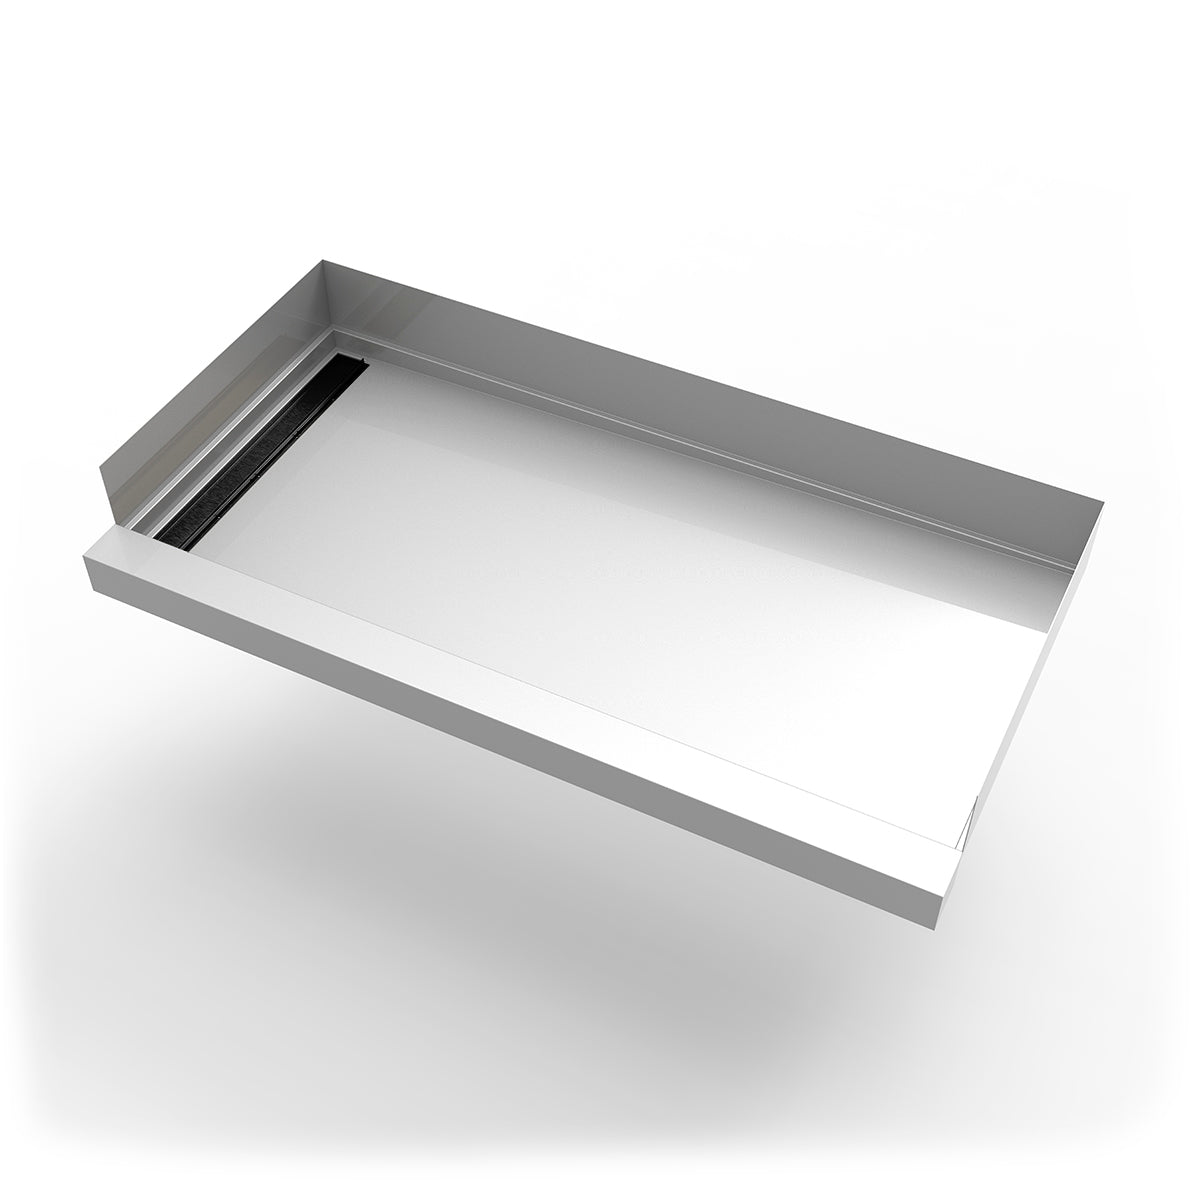 Infinity Drain 30"x 60" Stainless Steel Shower Base with Left Wall Tile Insert Linear Drain location